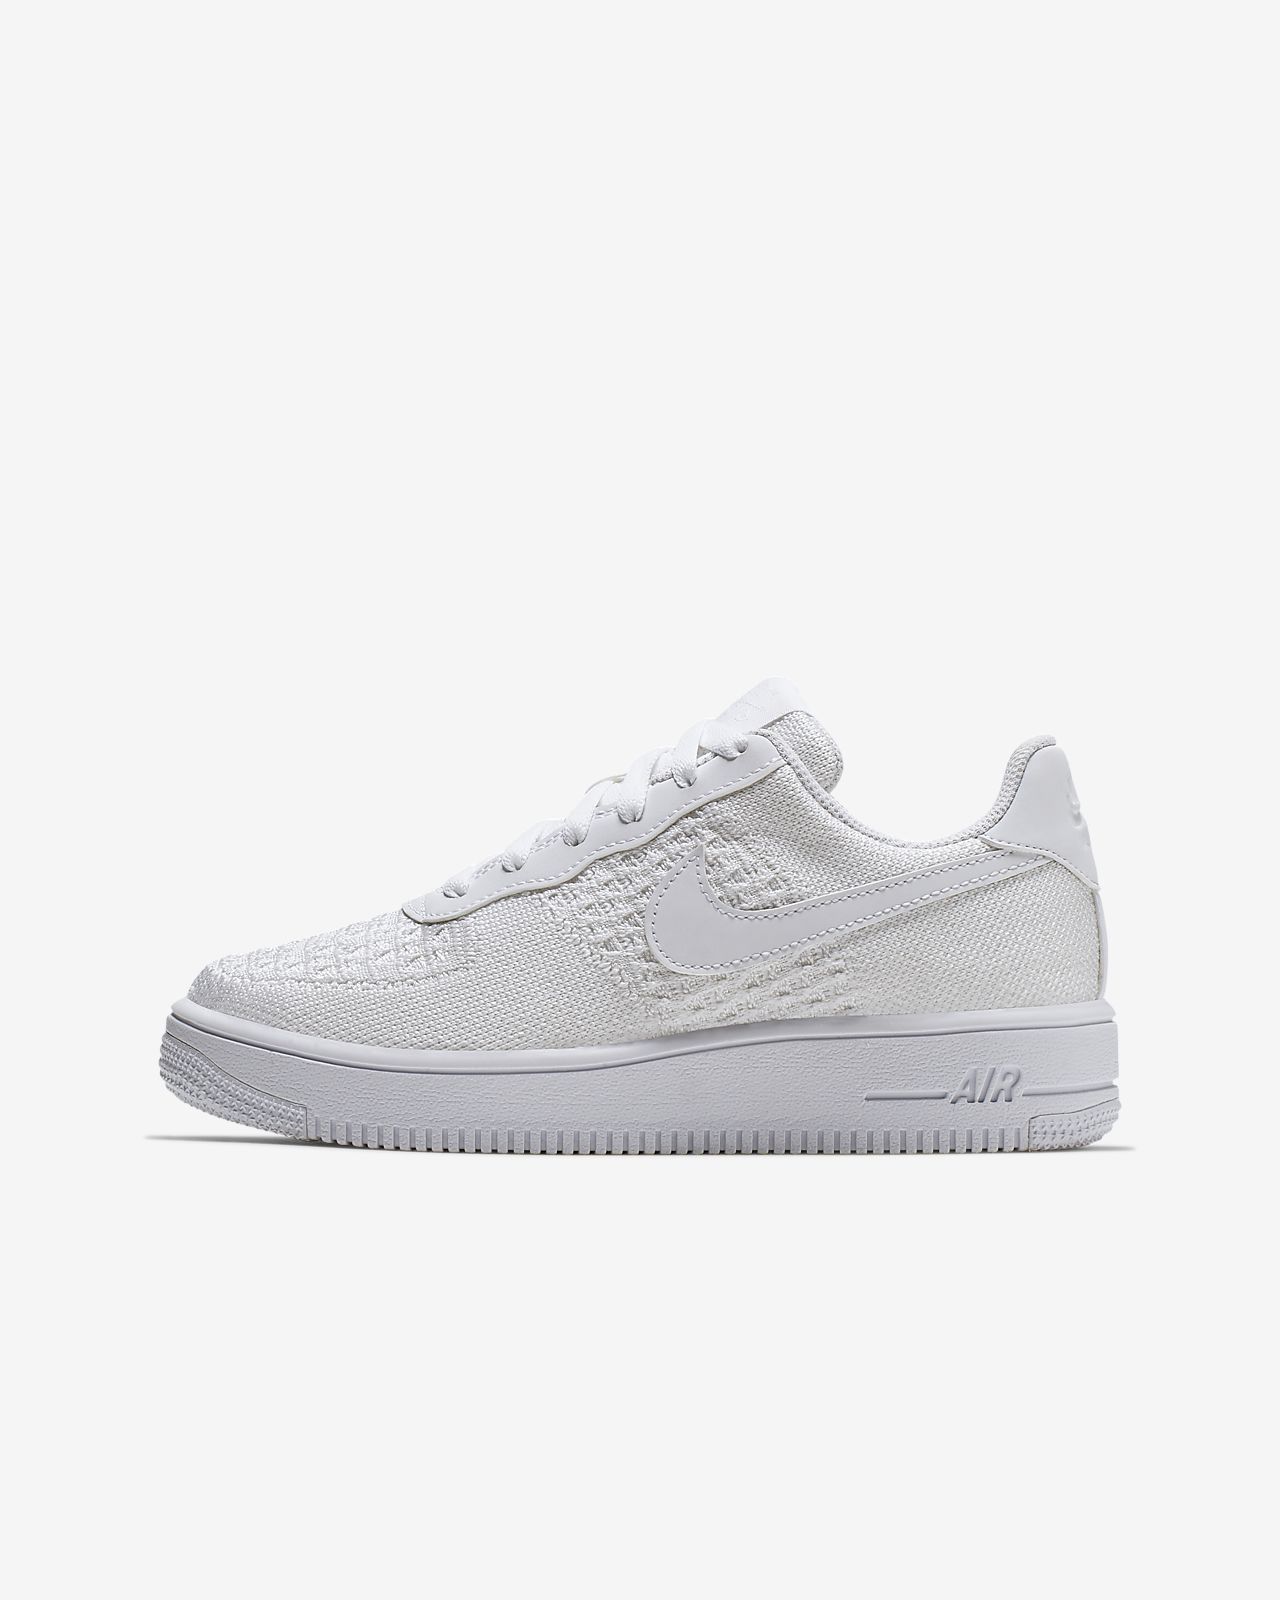 nike air force 1 flyknit hombre blanco